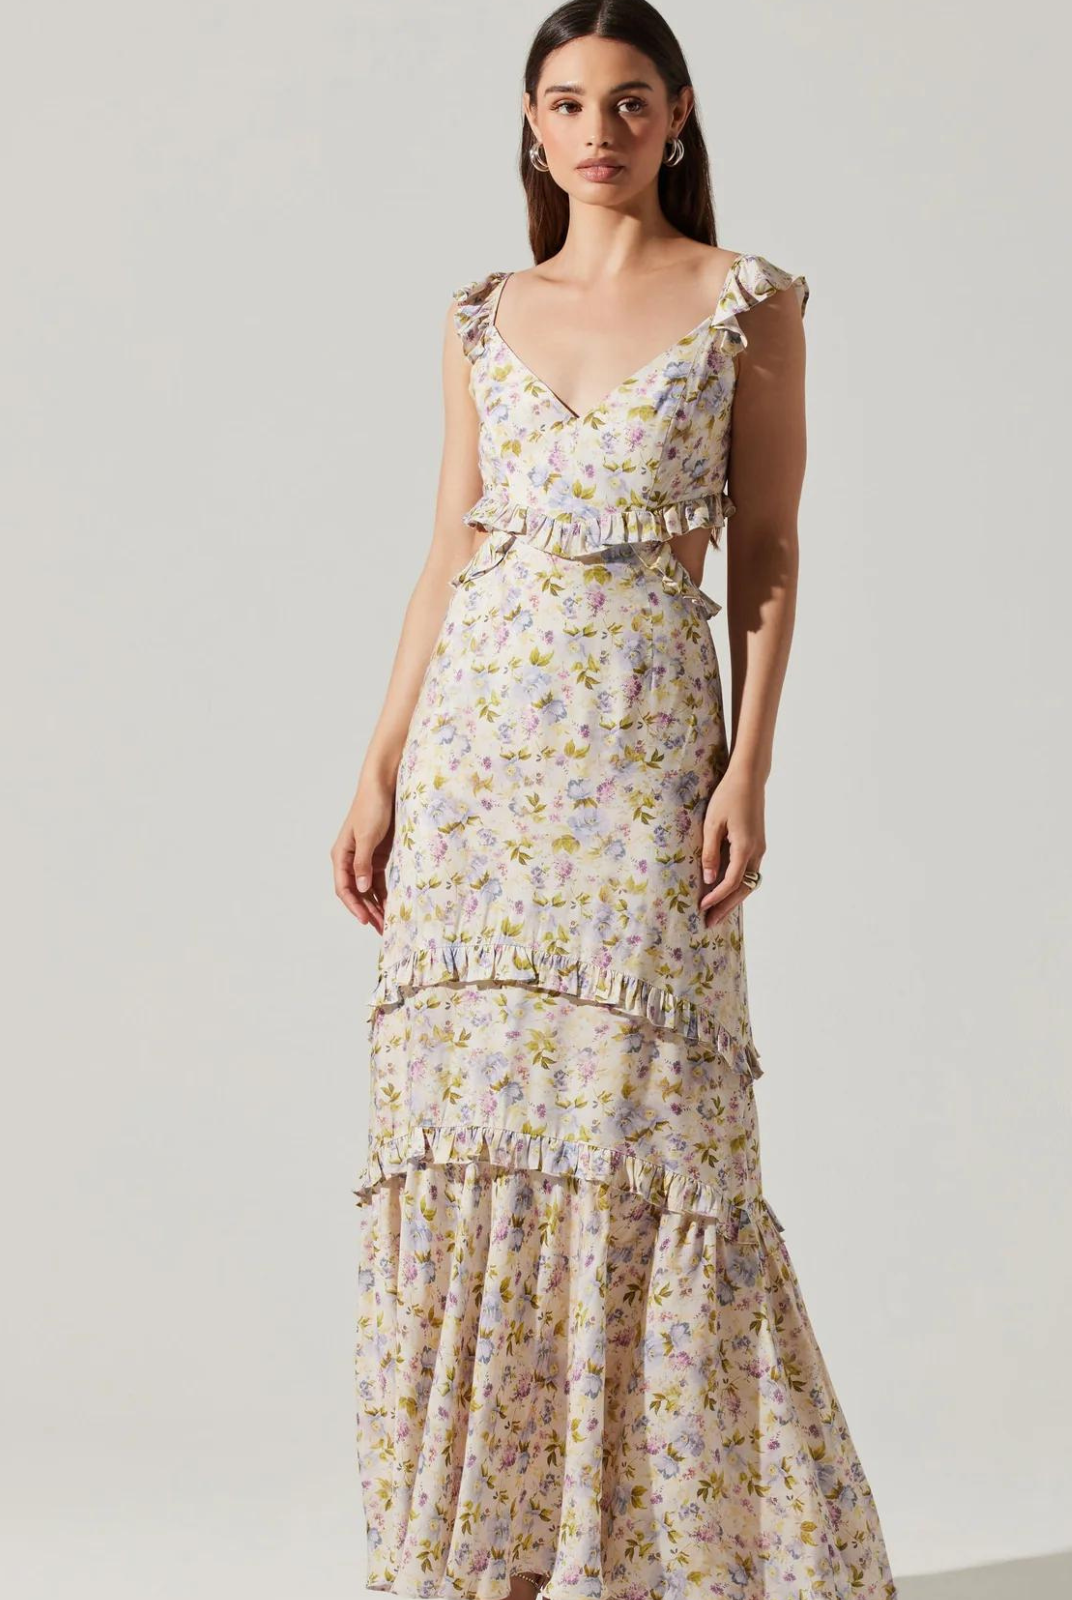 ASTR The Label Cassie Floral Ruffle Maxi Dress. Plunging neckline, ruffle sleeves Cutouts at side, tie back closure, adjustable straps Slight boning at bodice, fully lined, concealed back zipper closure